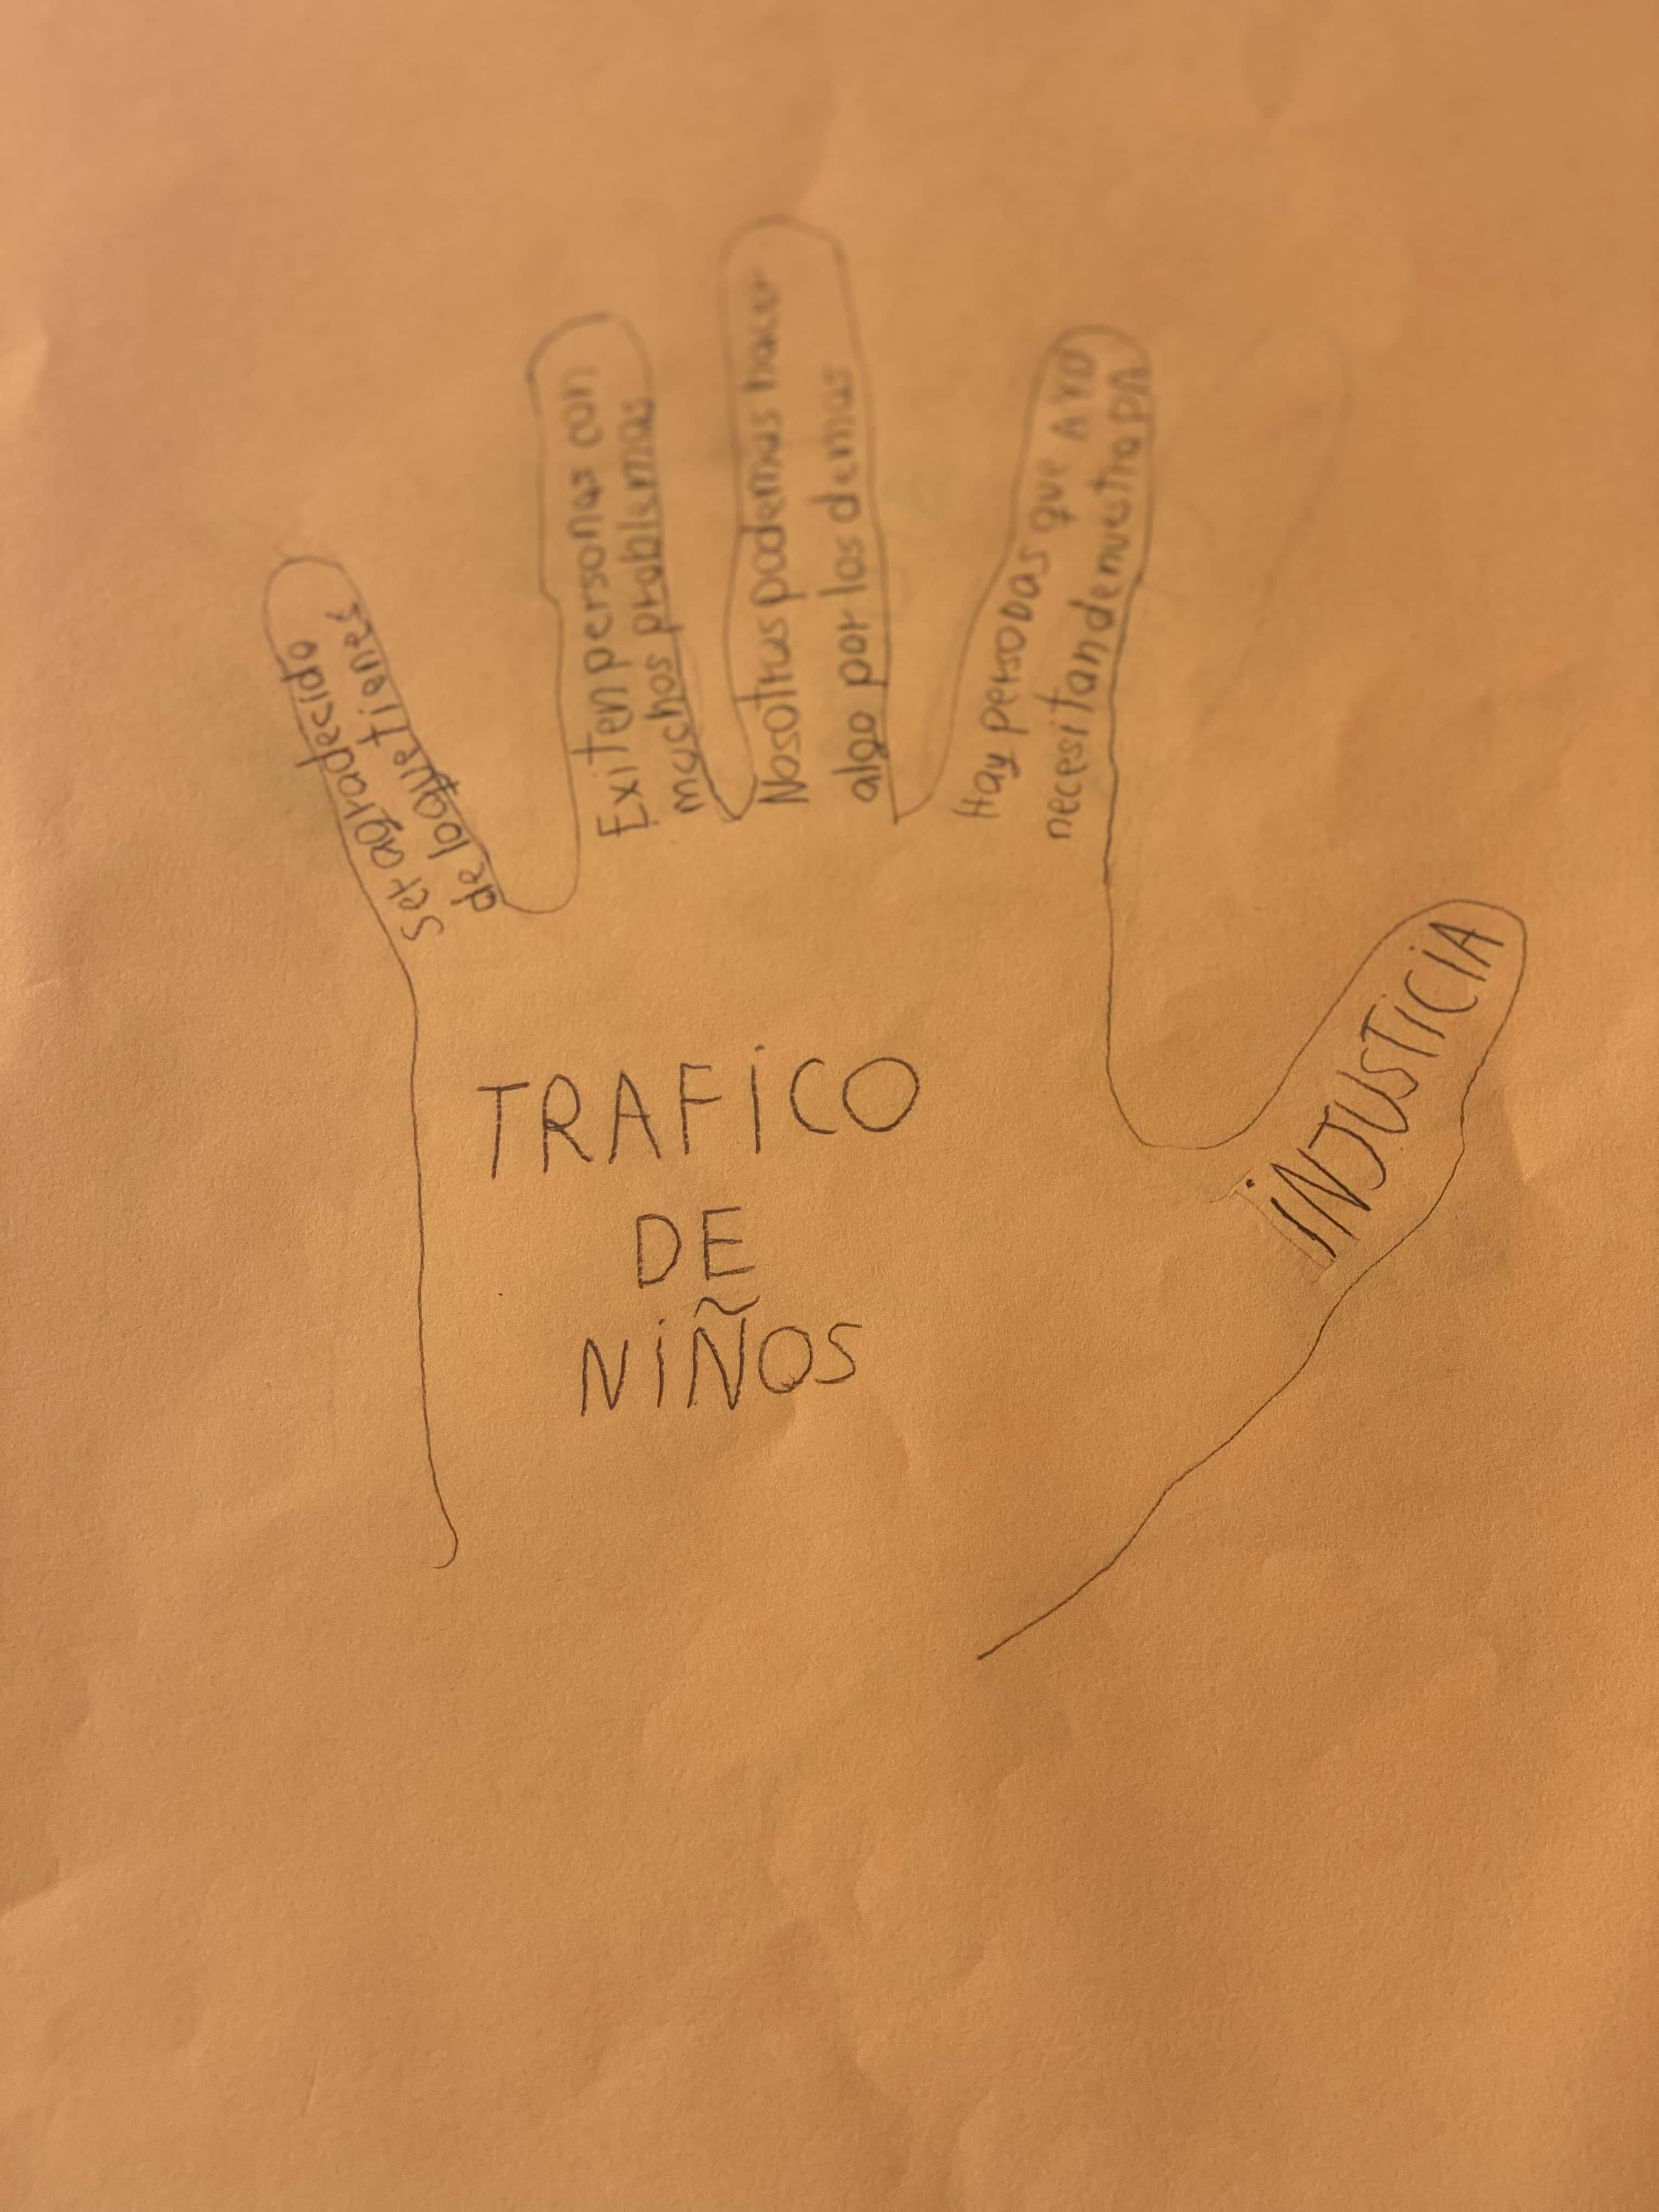 Human Trafficking activity by grade 8 students (age 13)